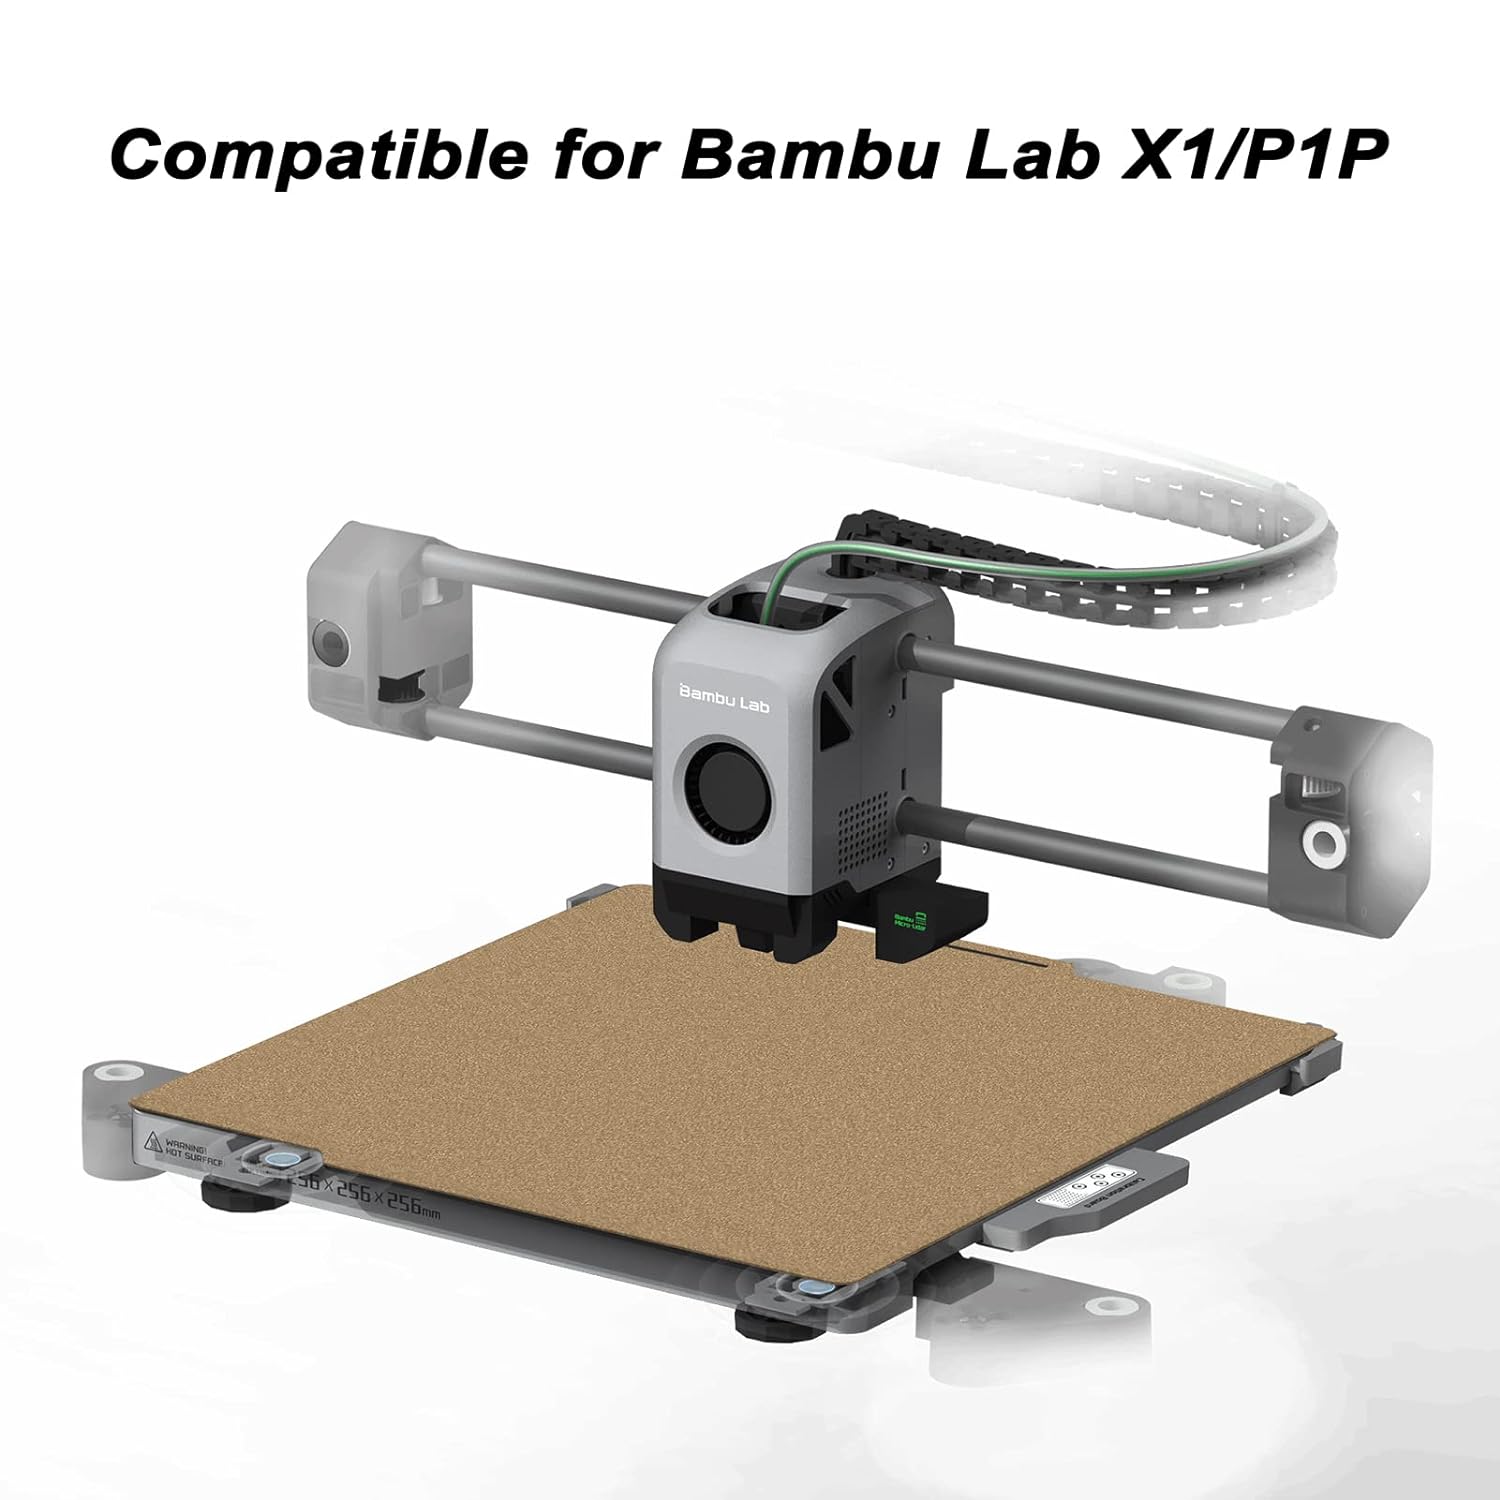 ENOMAKER Magnetic PEI Bed Plate for Bambu Lab P1P P1S X1 Carbon 3D Printer Spring Steel Flex Sheet Upgrade Double Sided Smooth/Textured Hotbed Sticker Removable Build Surface Platform Mat 257x257mm